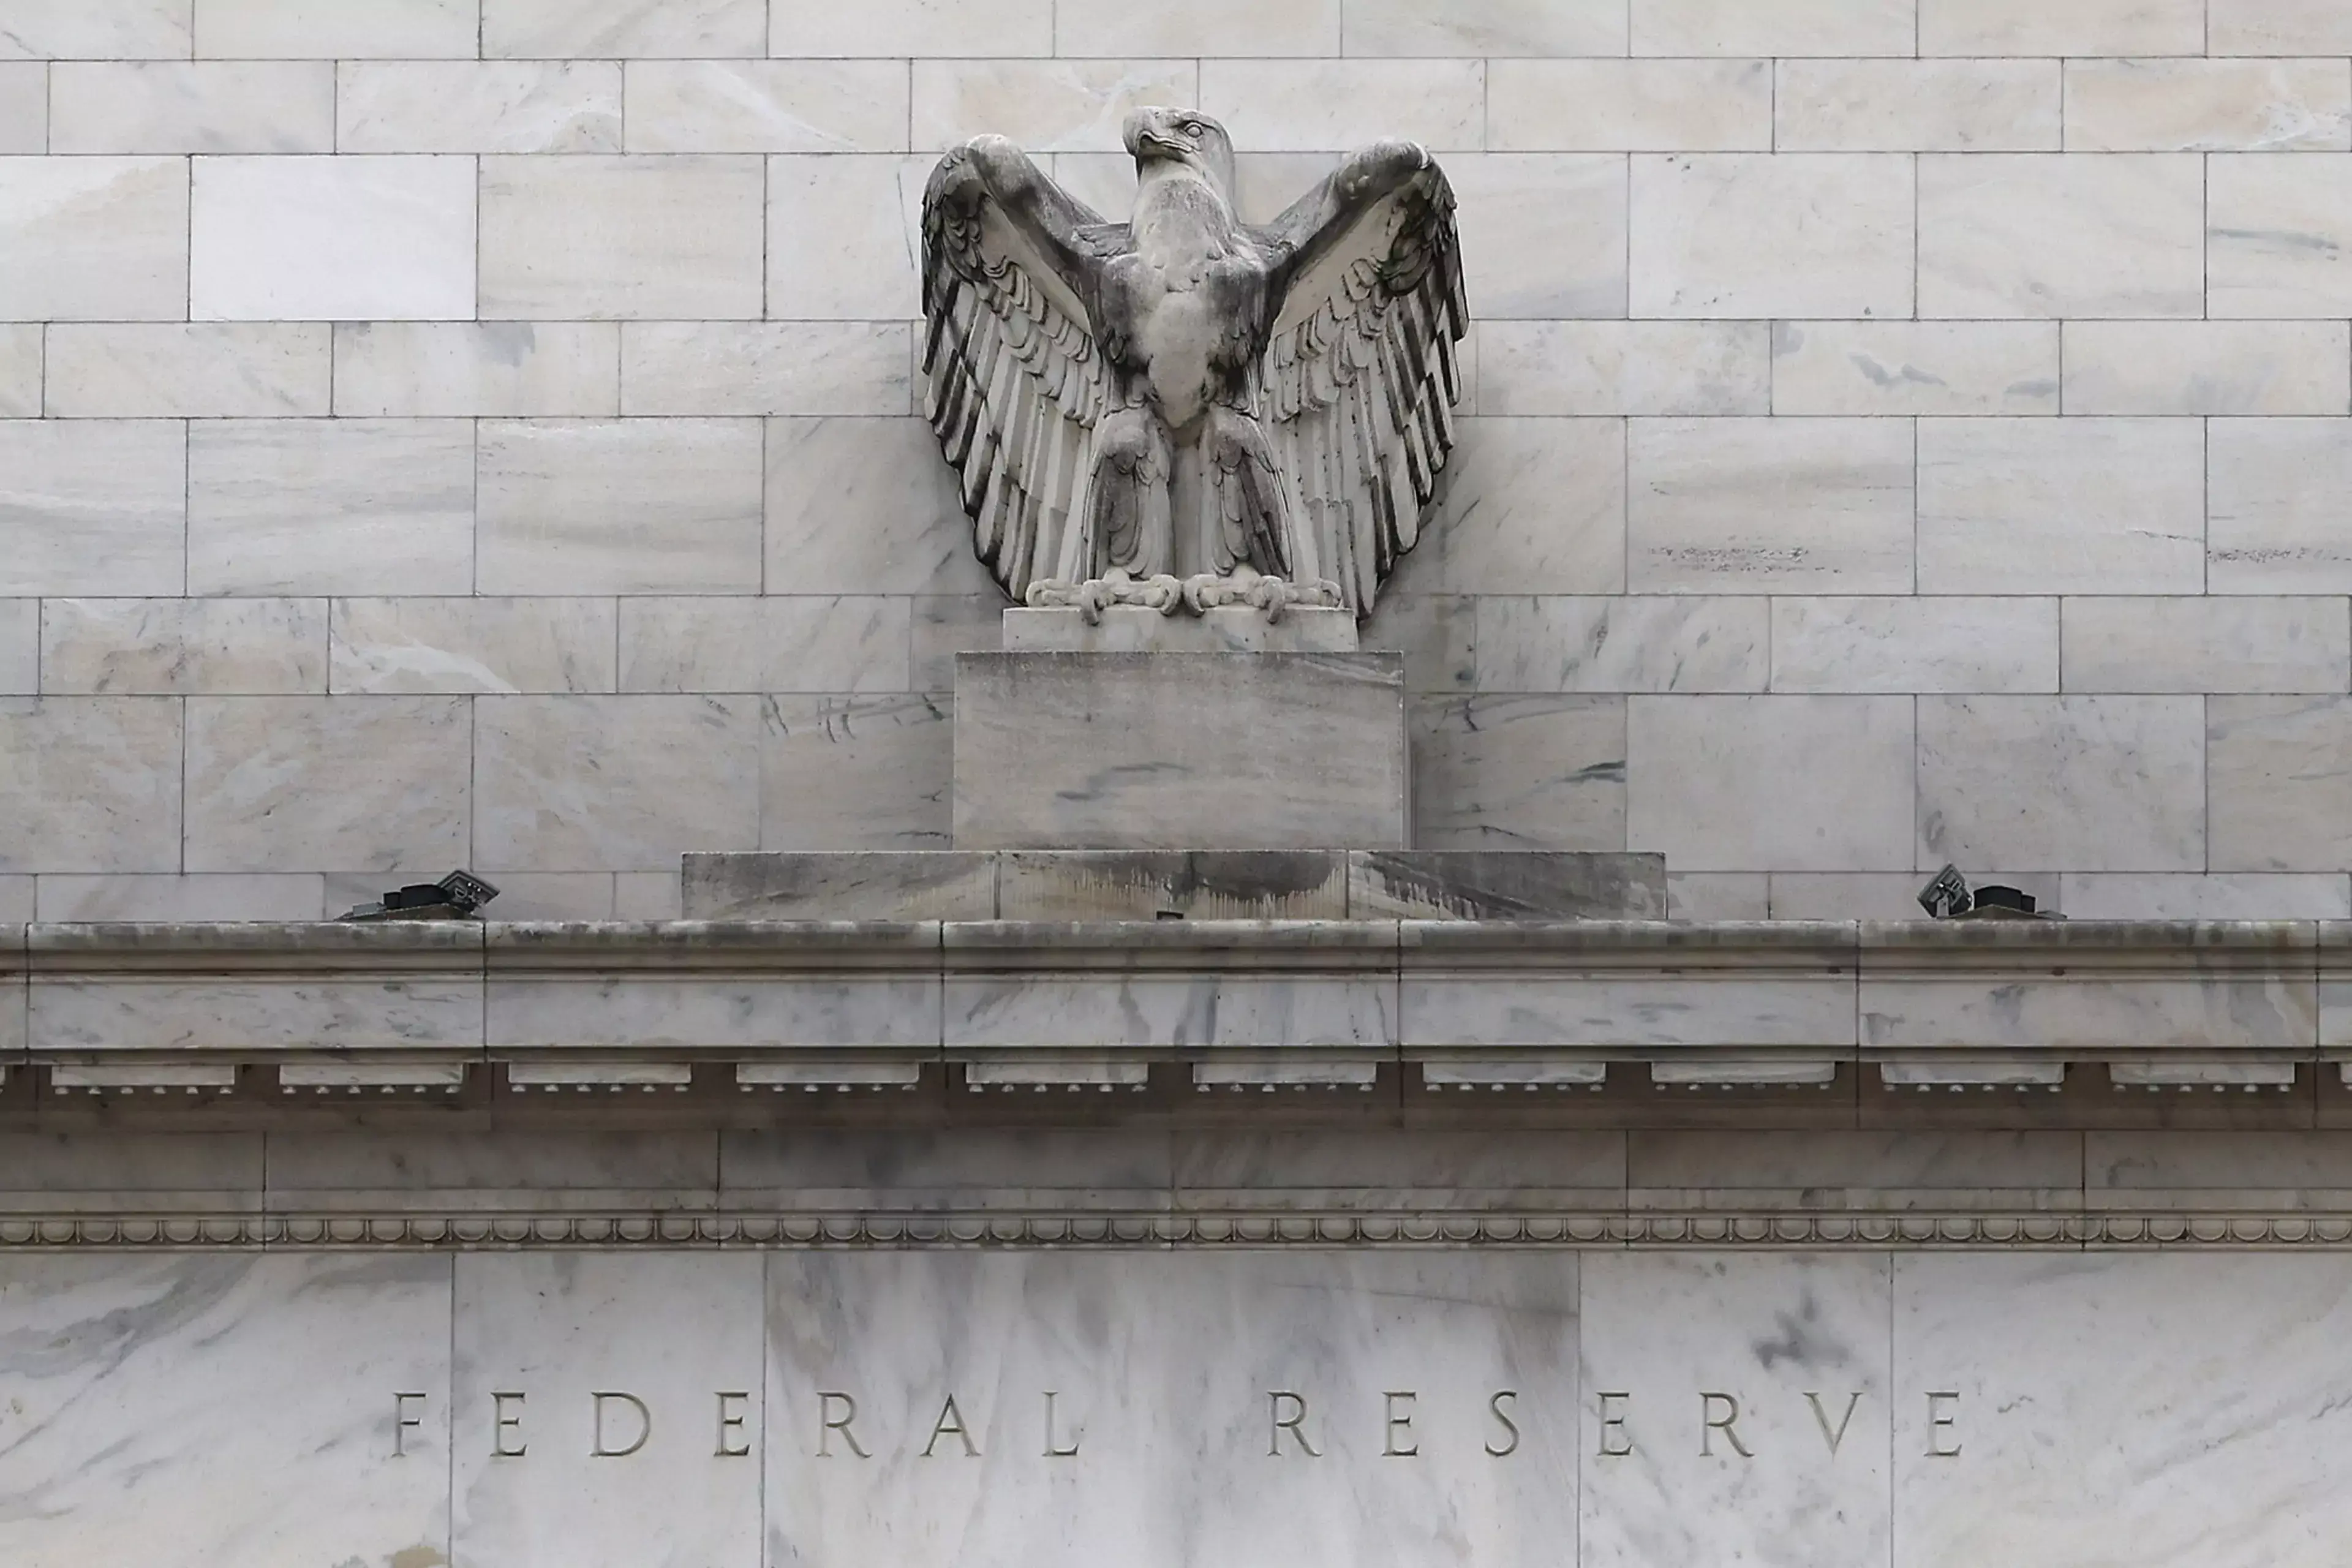 The Federal Reserve is the most powerful U.S. economic institution.